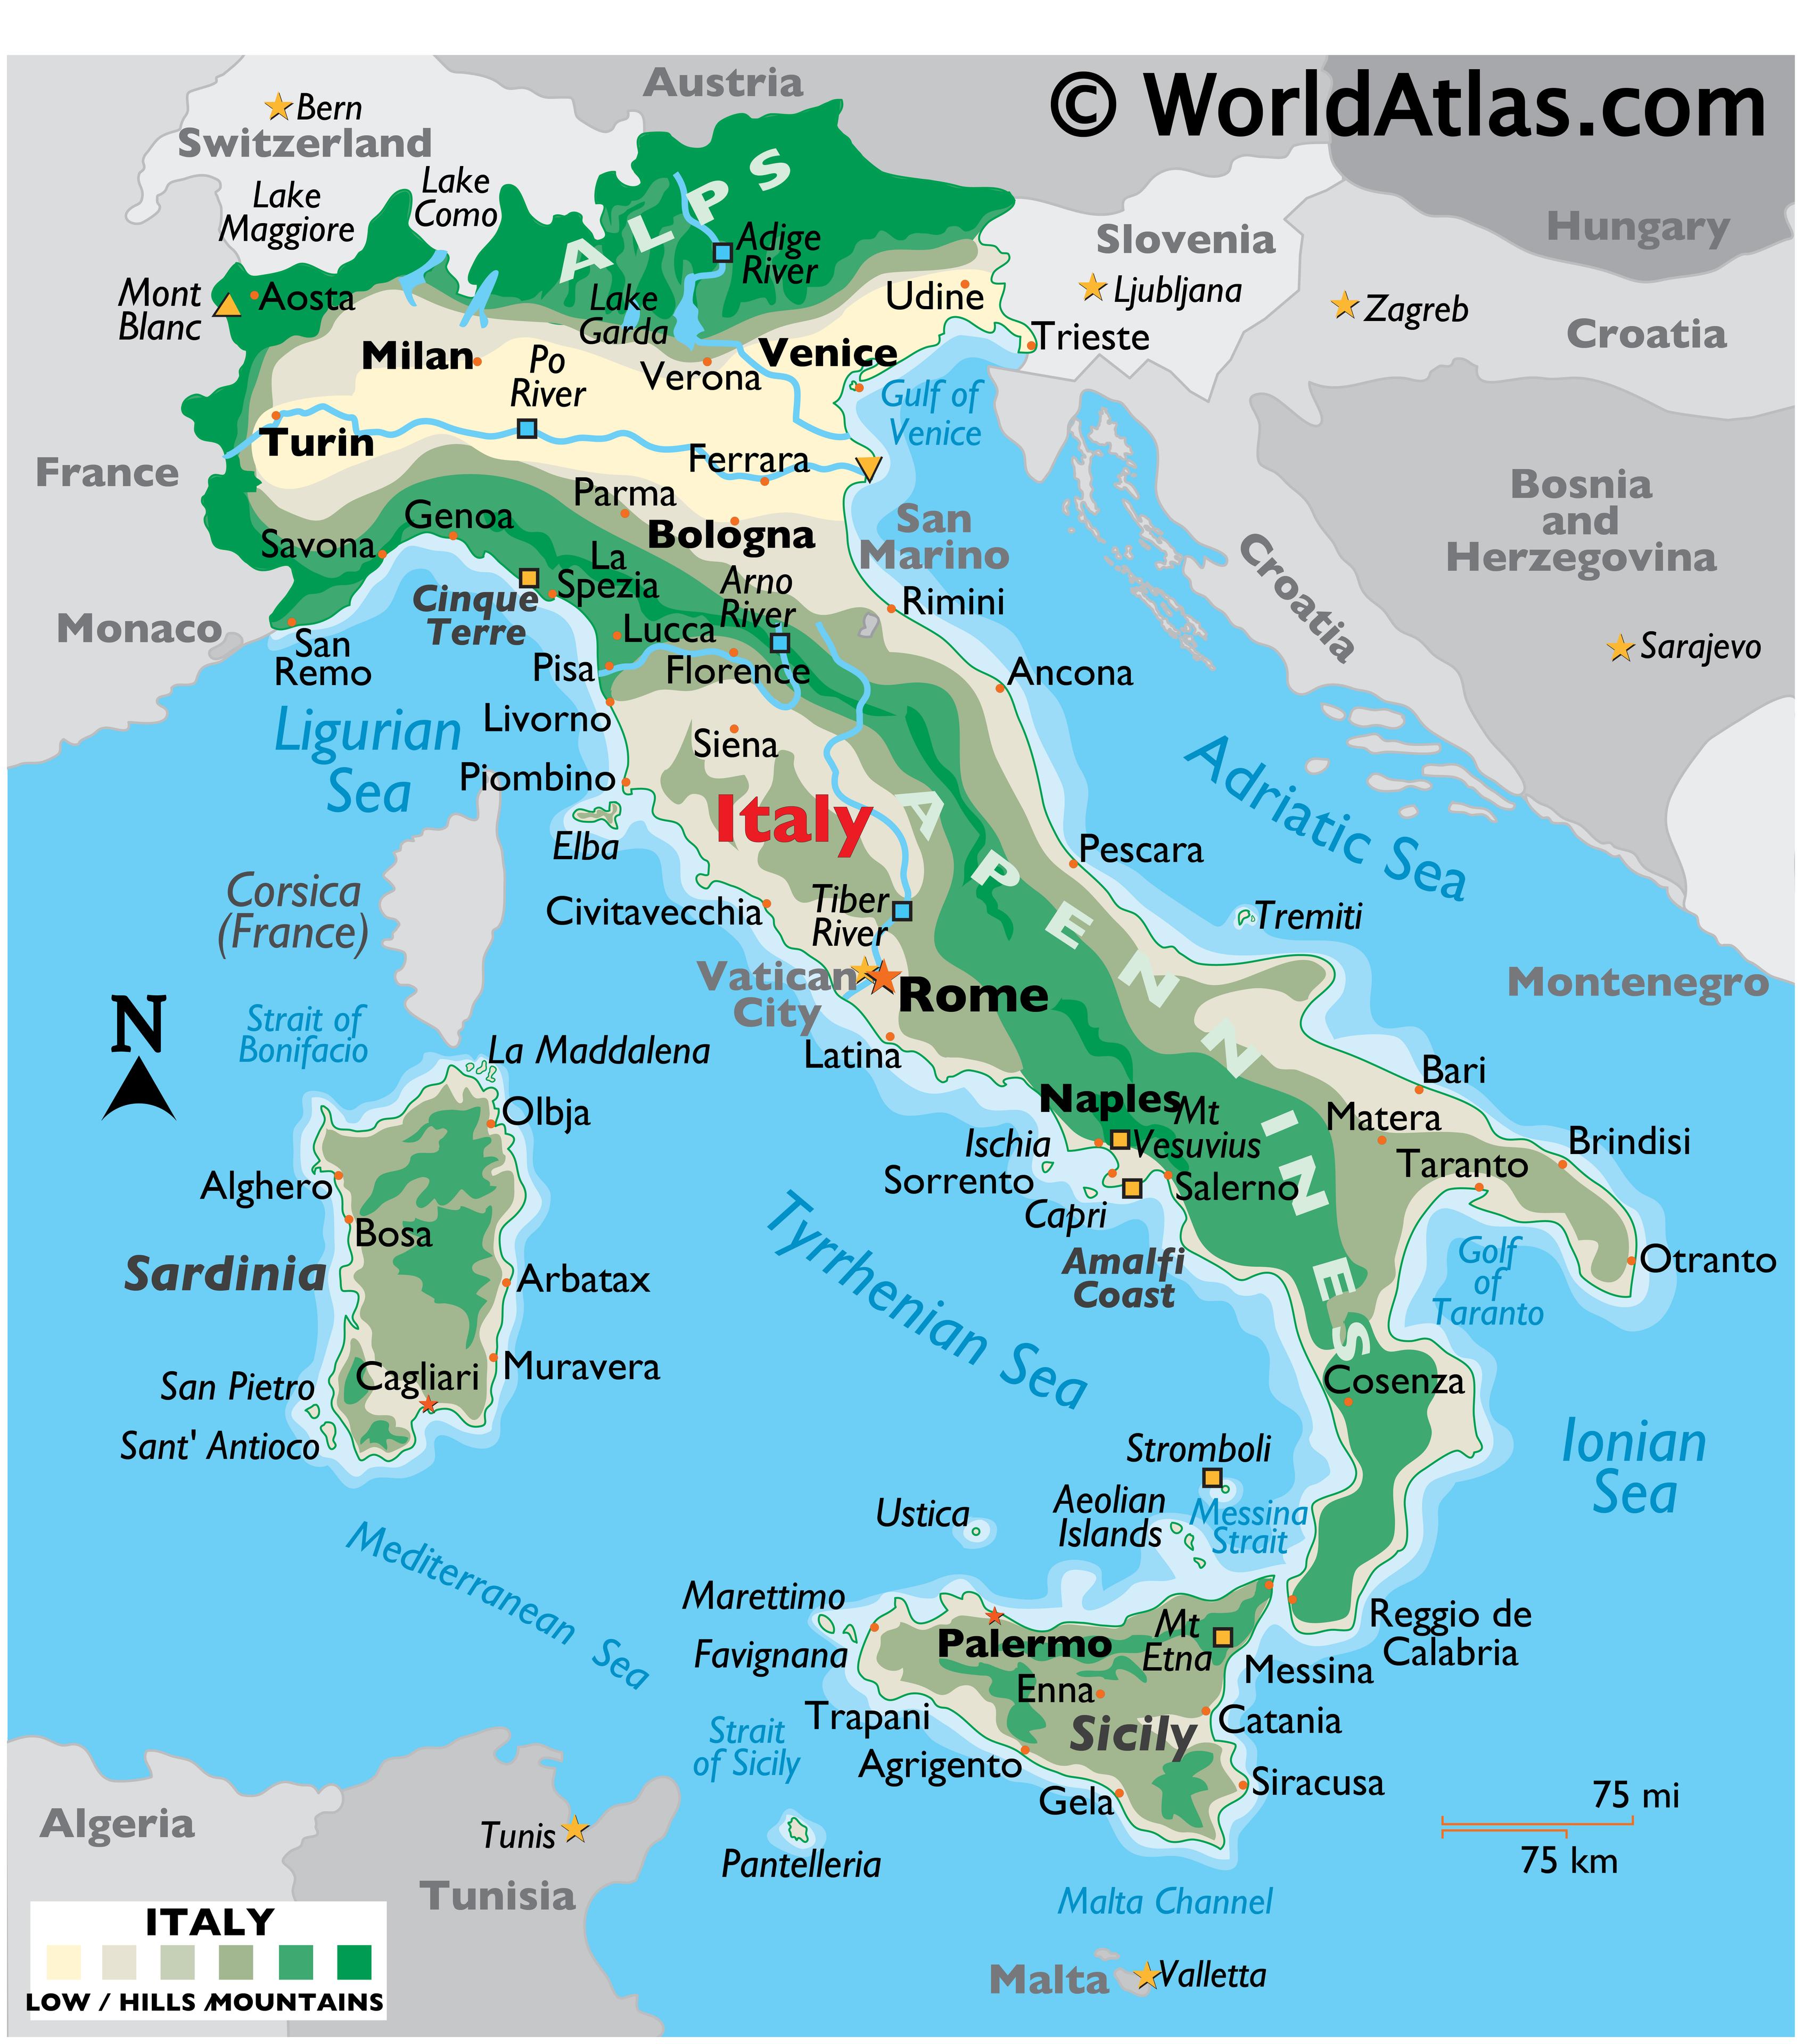 Can You Show Me A Map Of Italy